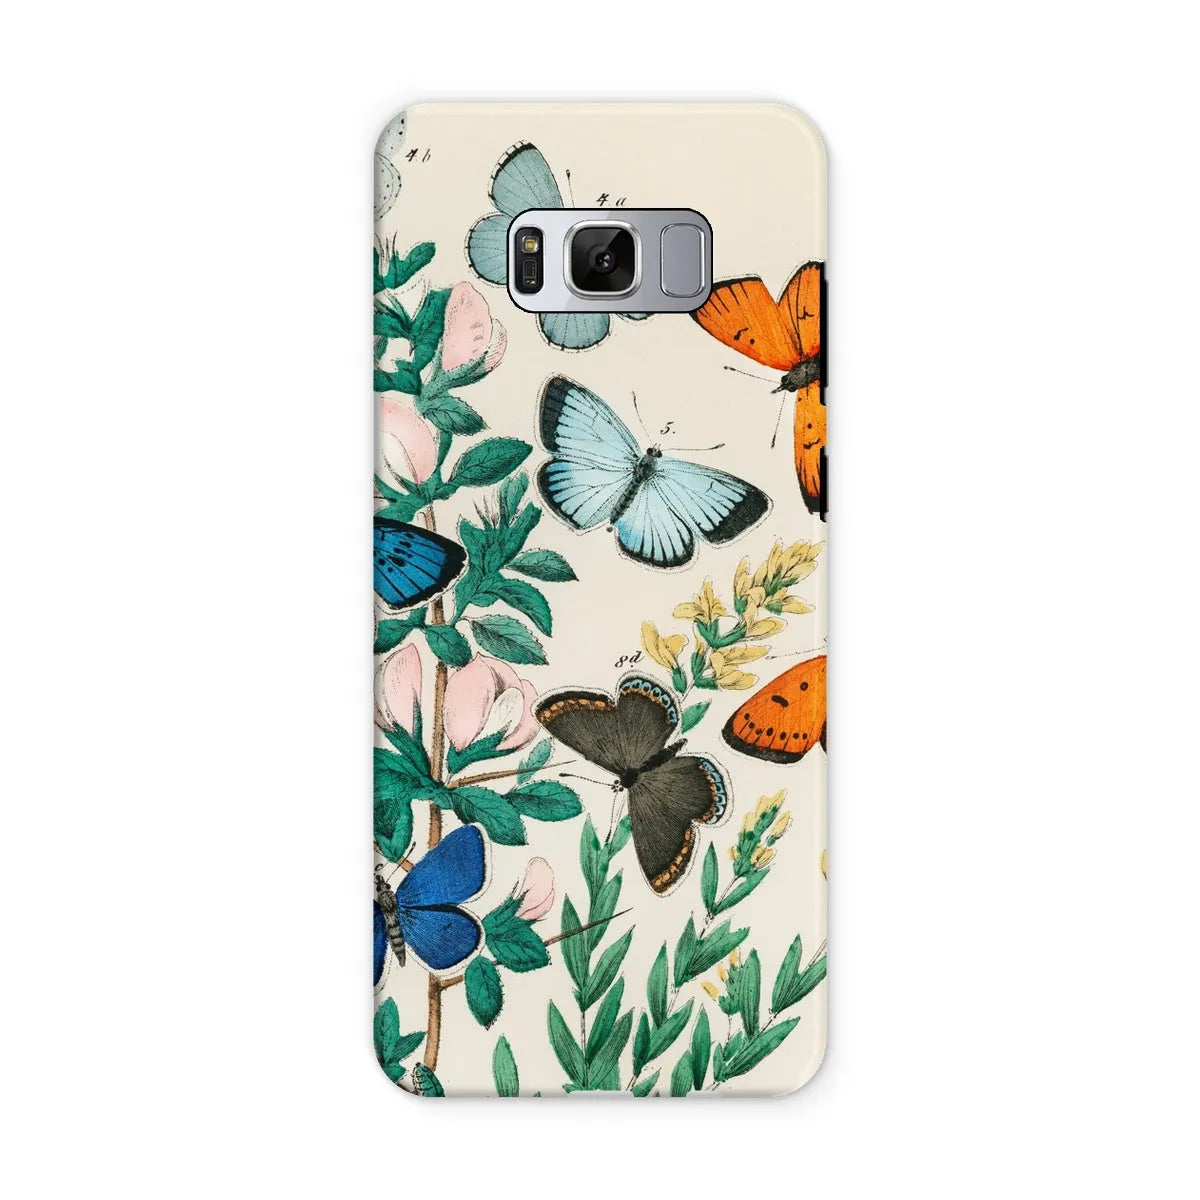 Another Butterfly Aesthetic Art Phone Case - William Forsell Kirby - Samsung Galaxy S8 / Matte - Mobile Phone Cases